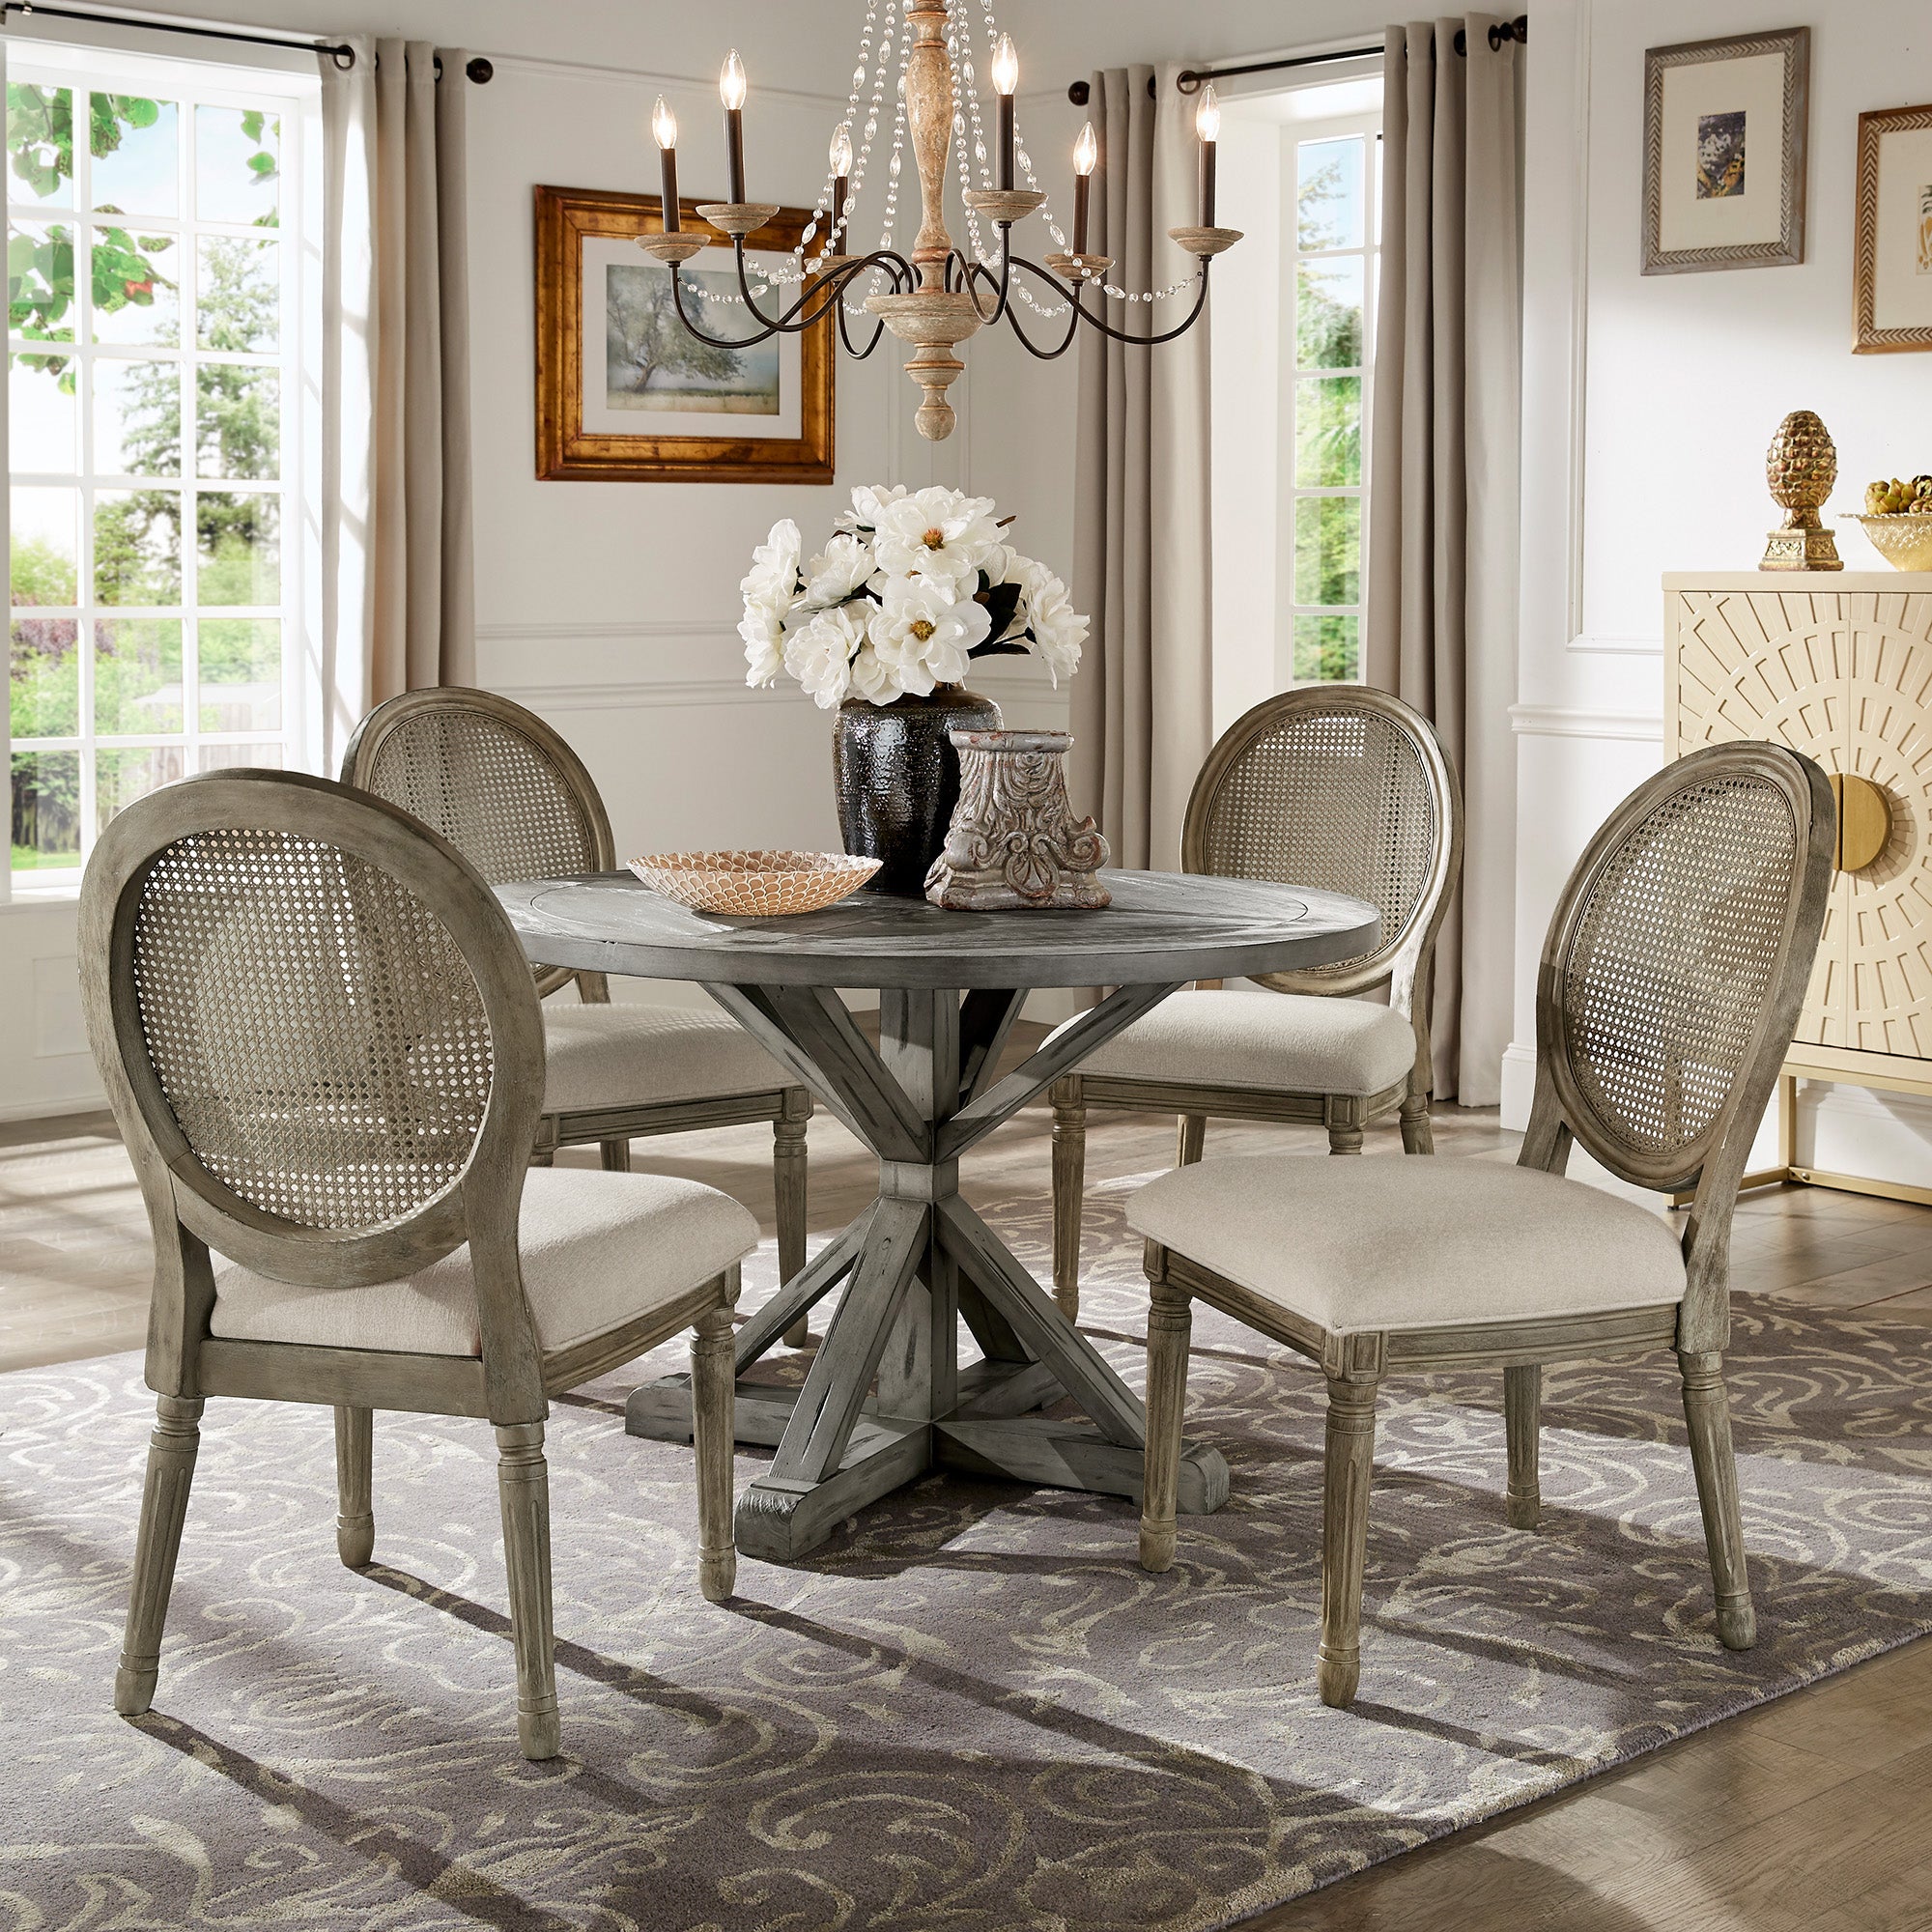 Round Linen and Wood Dining Chairs (Set of 2) - Cane Back, Antique Grey Oak Finish, Beige